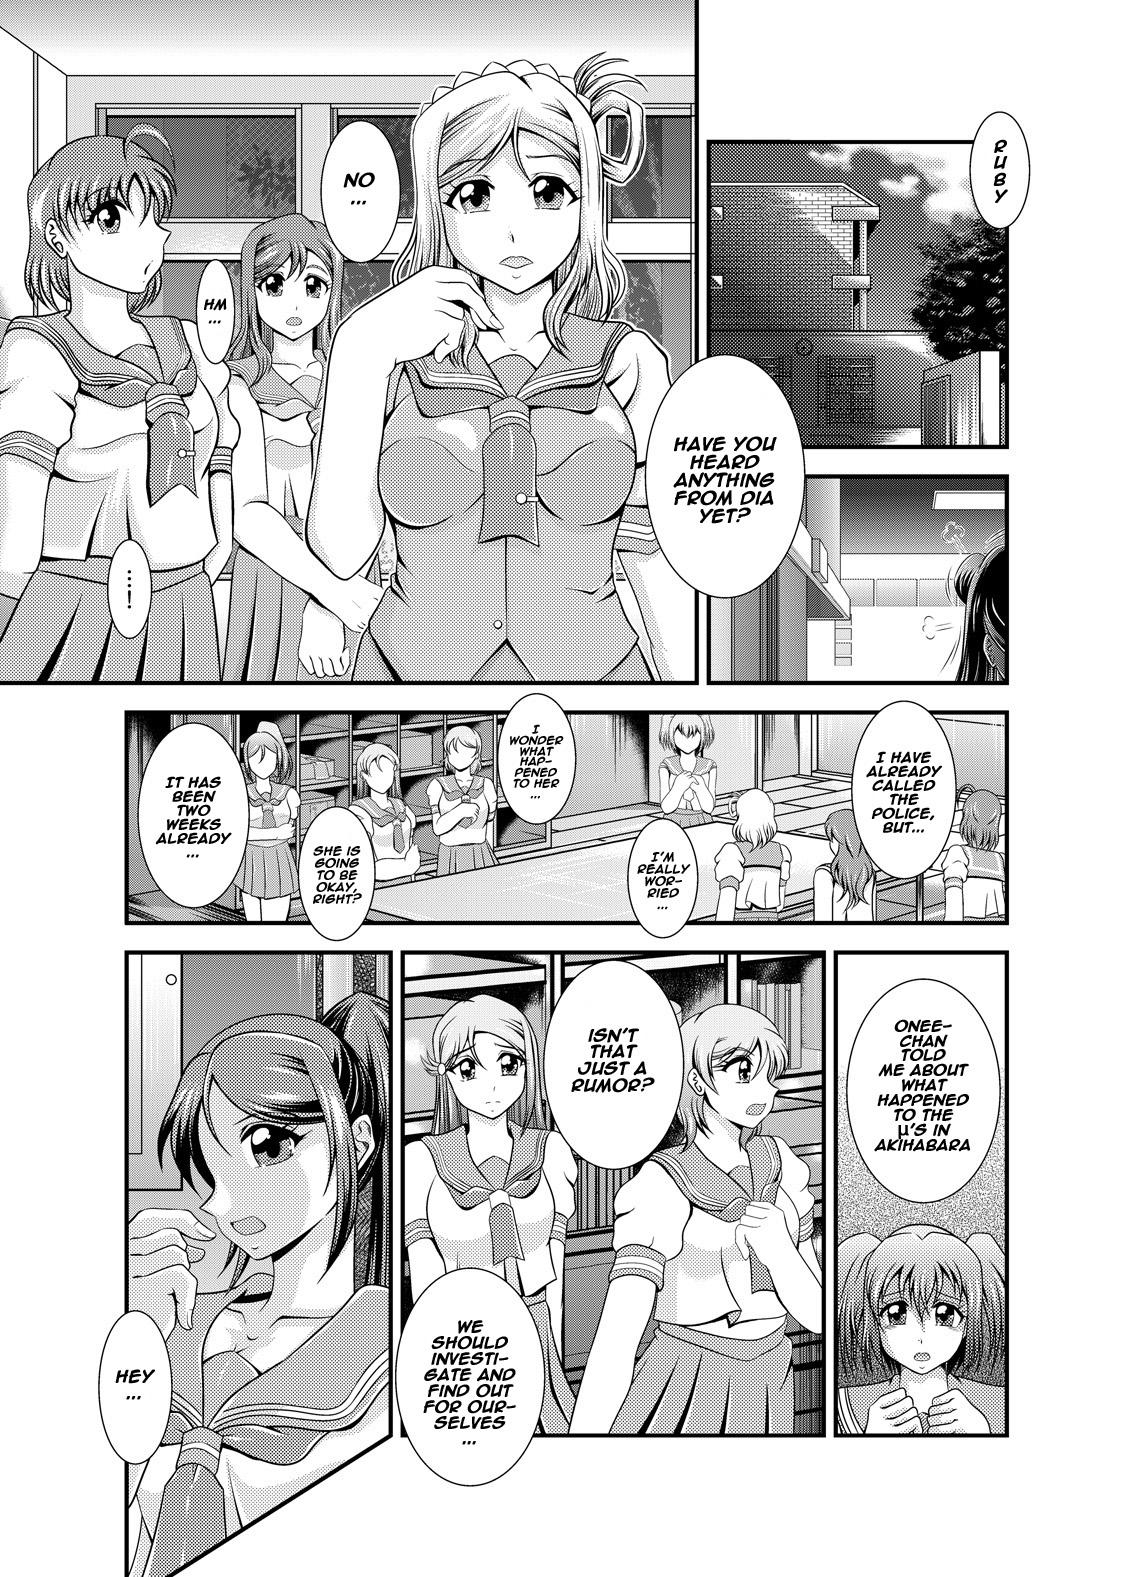 Hot Girl Fucking ProjectAqours EP01DIAMONDS - Love live sunshine Oldvsyoung - Page 3